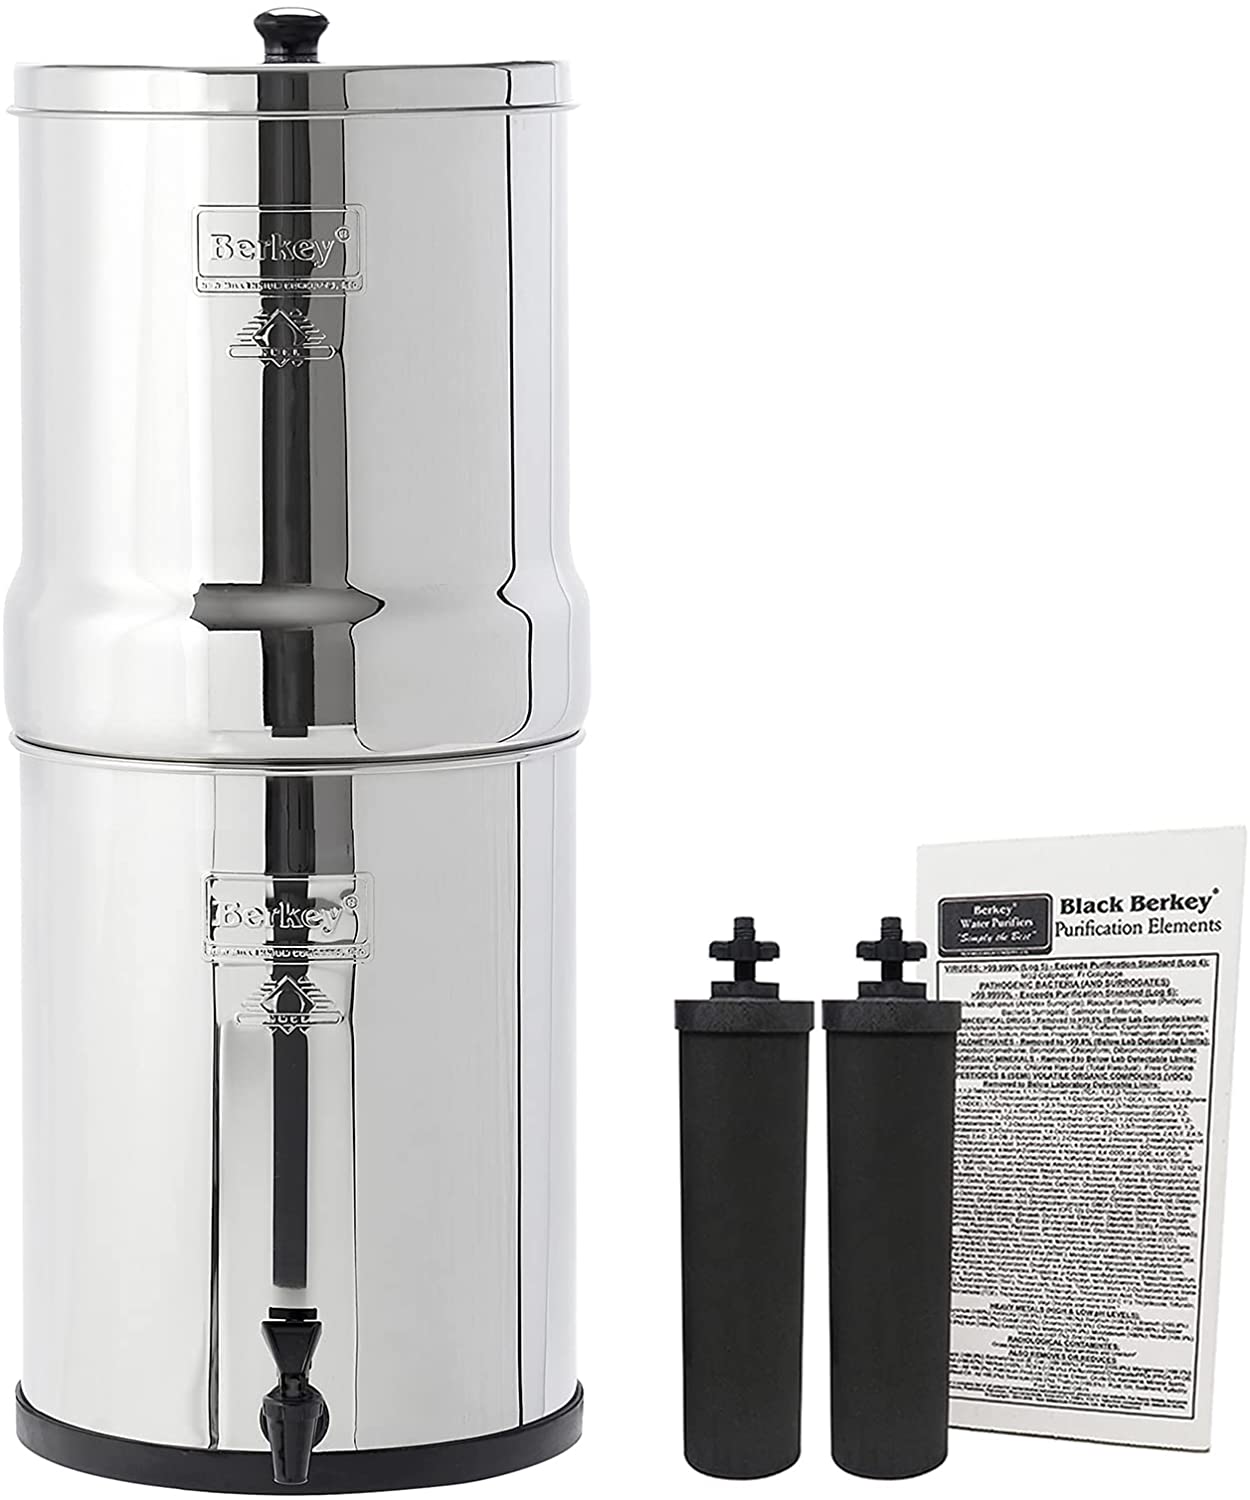 10 BEST COUNTERTOP WATER FILTER 2022 REVIEW: TOP HOME WATER FILTRATION SYSTEM All In One Cooling Gear Lab: Any Refrigerators Air Conditioners Freezers Ice Makers Coolers Fans Reviewed And Compared.